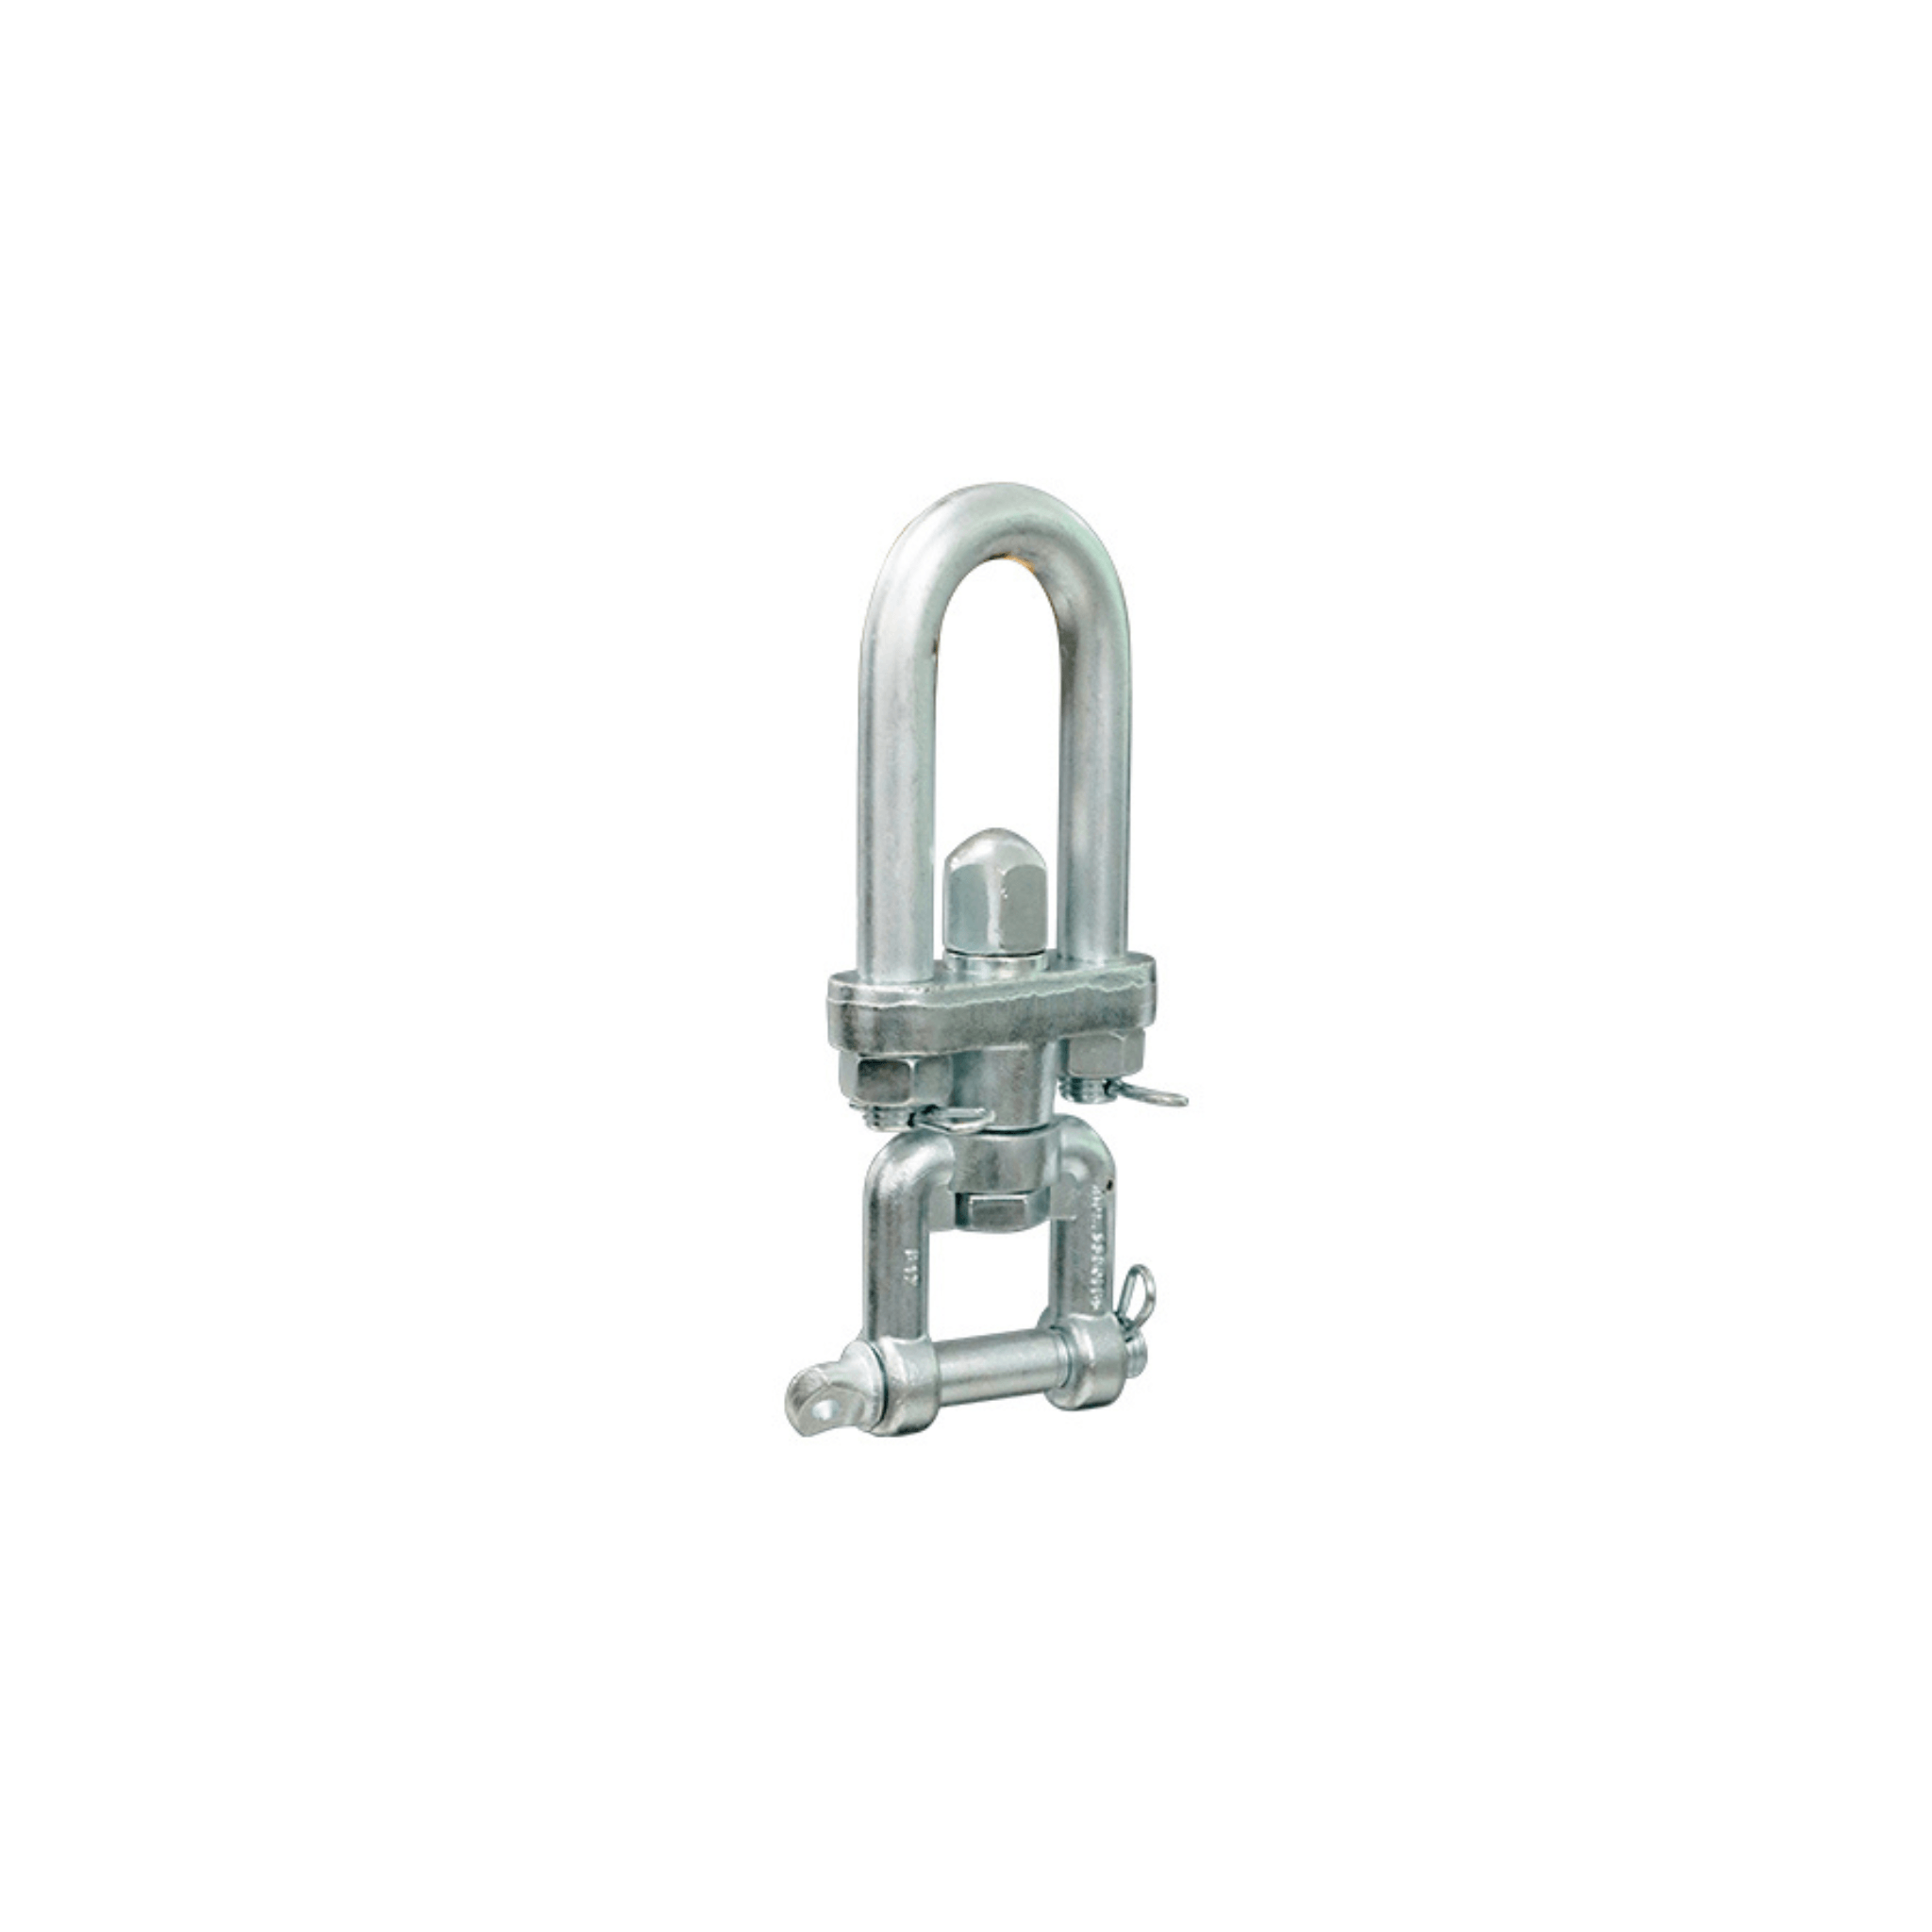 Abaco Swivel Shackle SWS2500 - Direct Stone Tool Supply, Inc